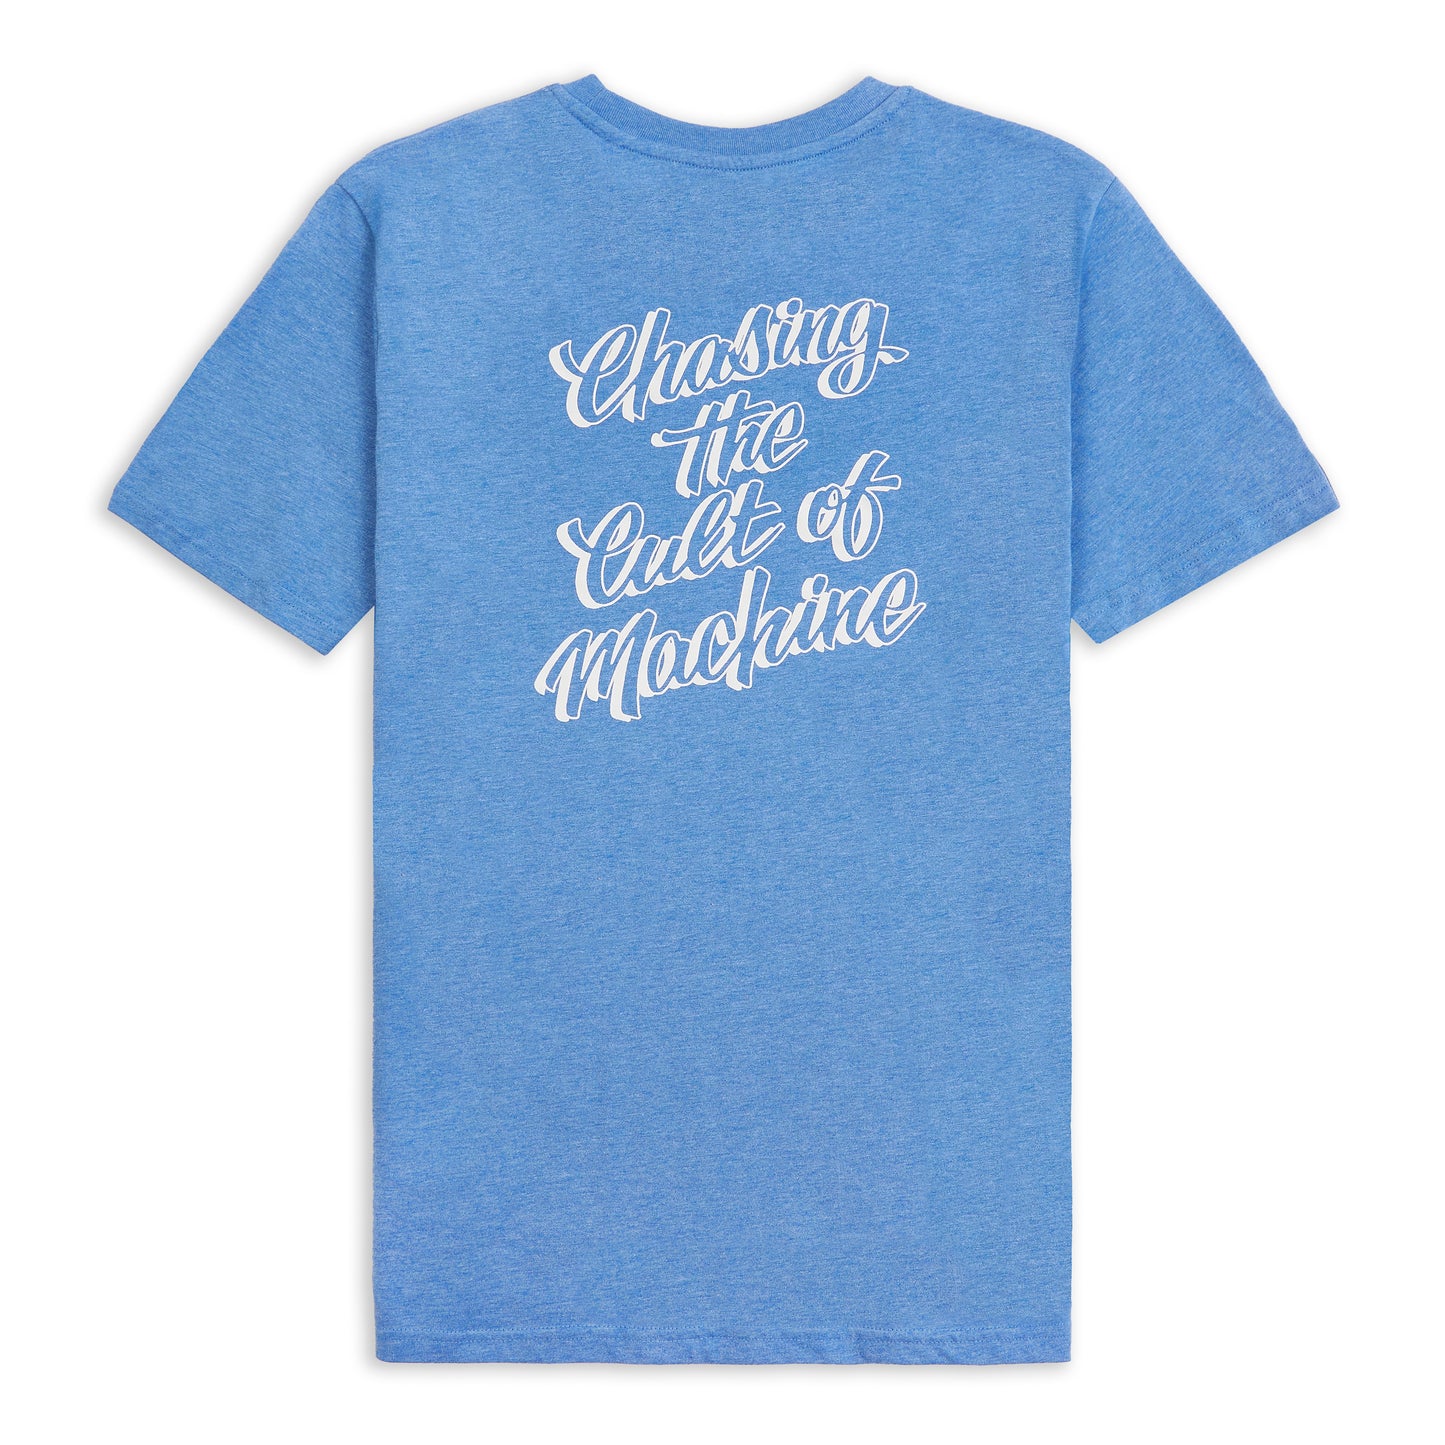 Chasing The  Cult Of Machine. Tee. Blue